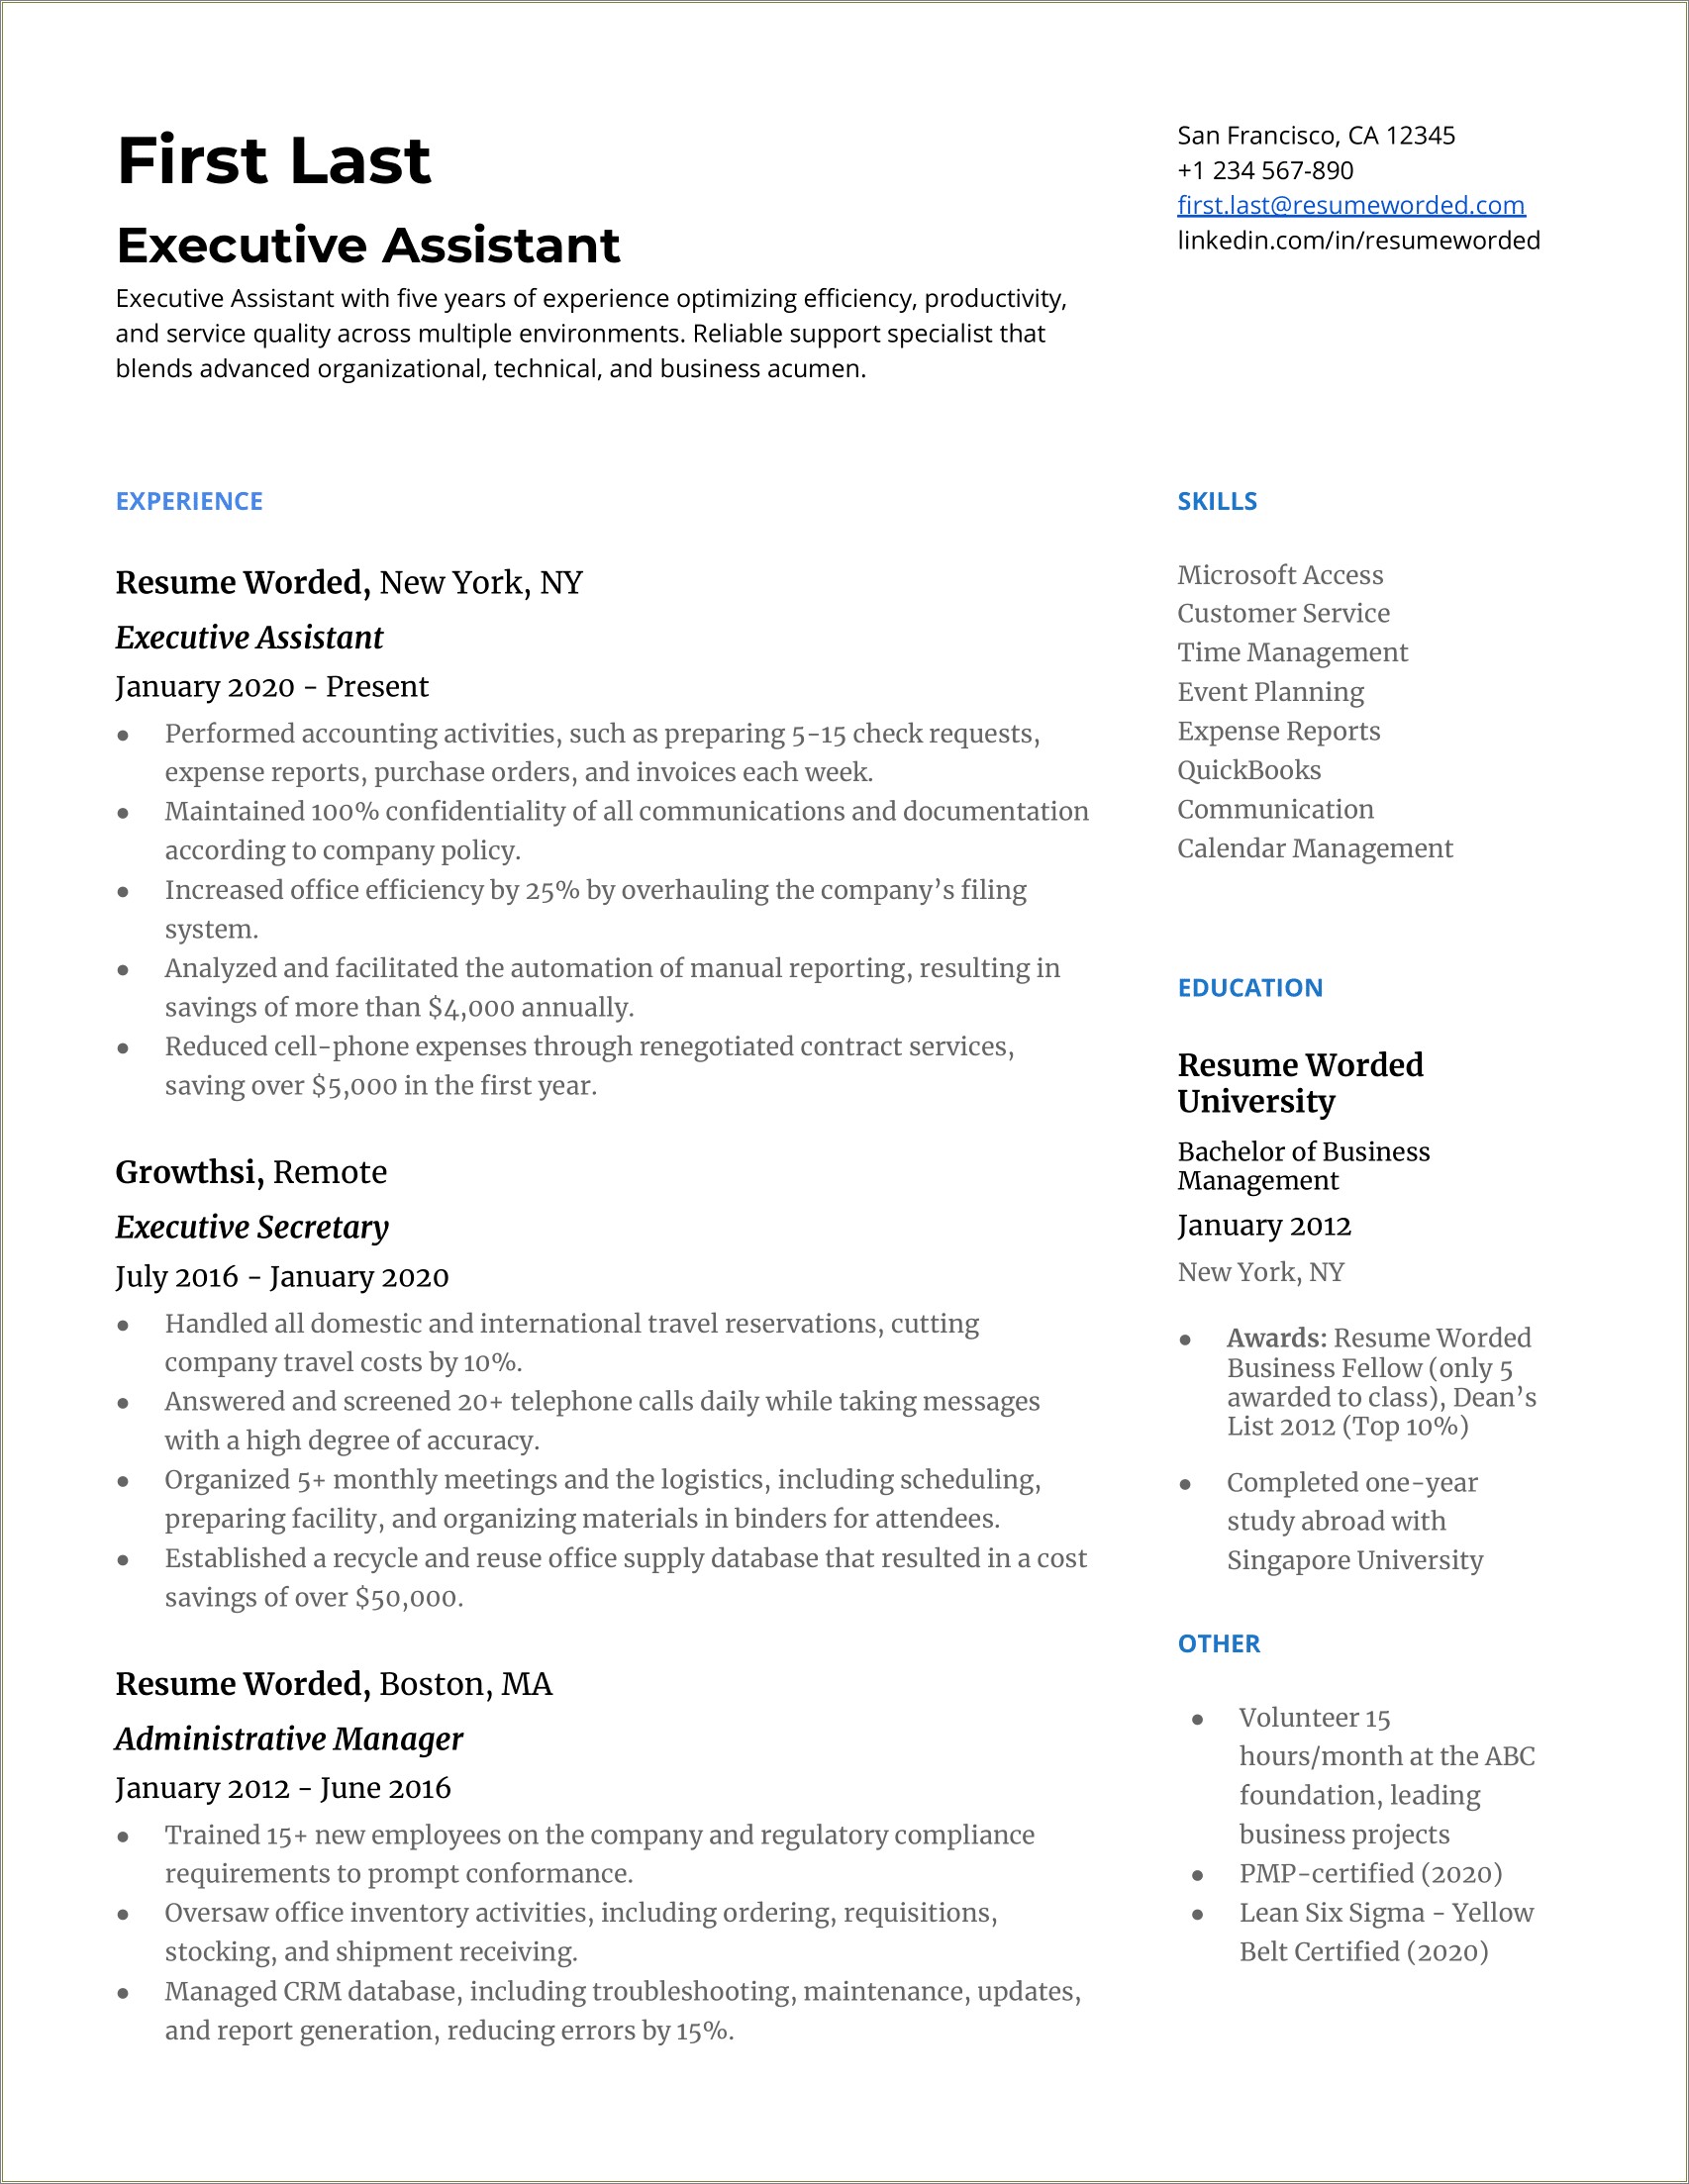 time management skills examples for resume